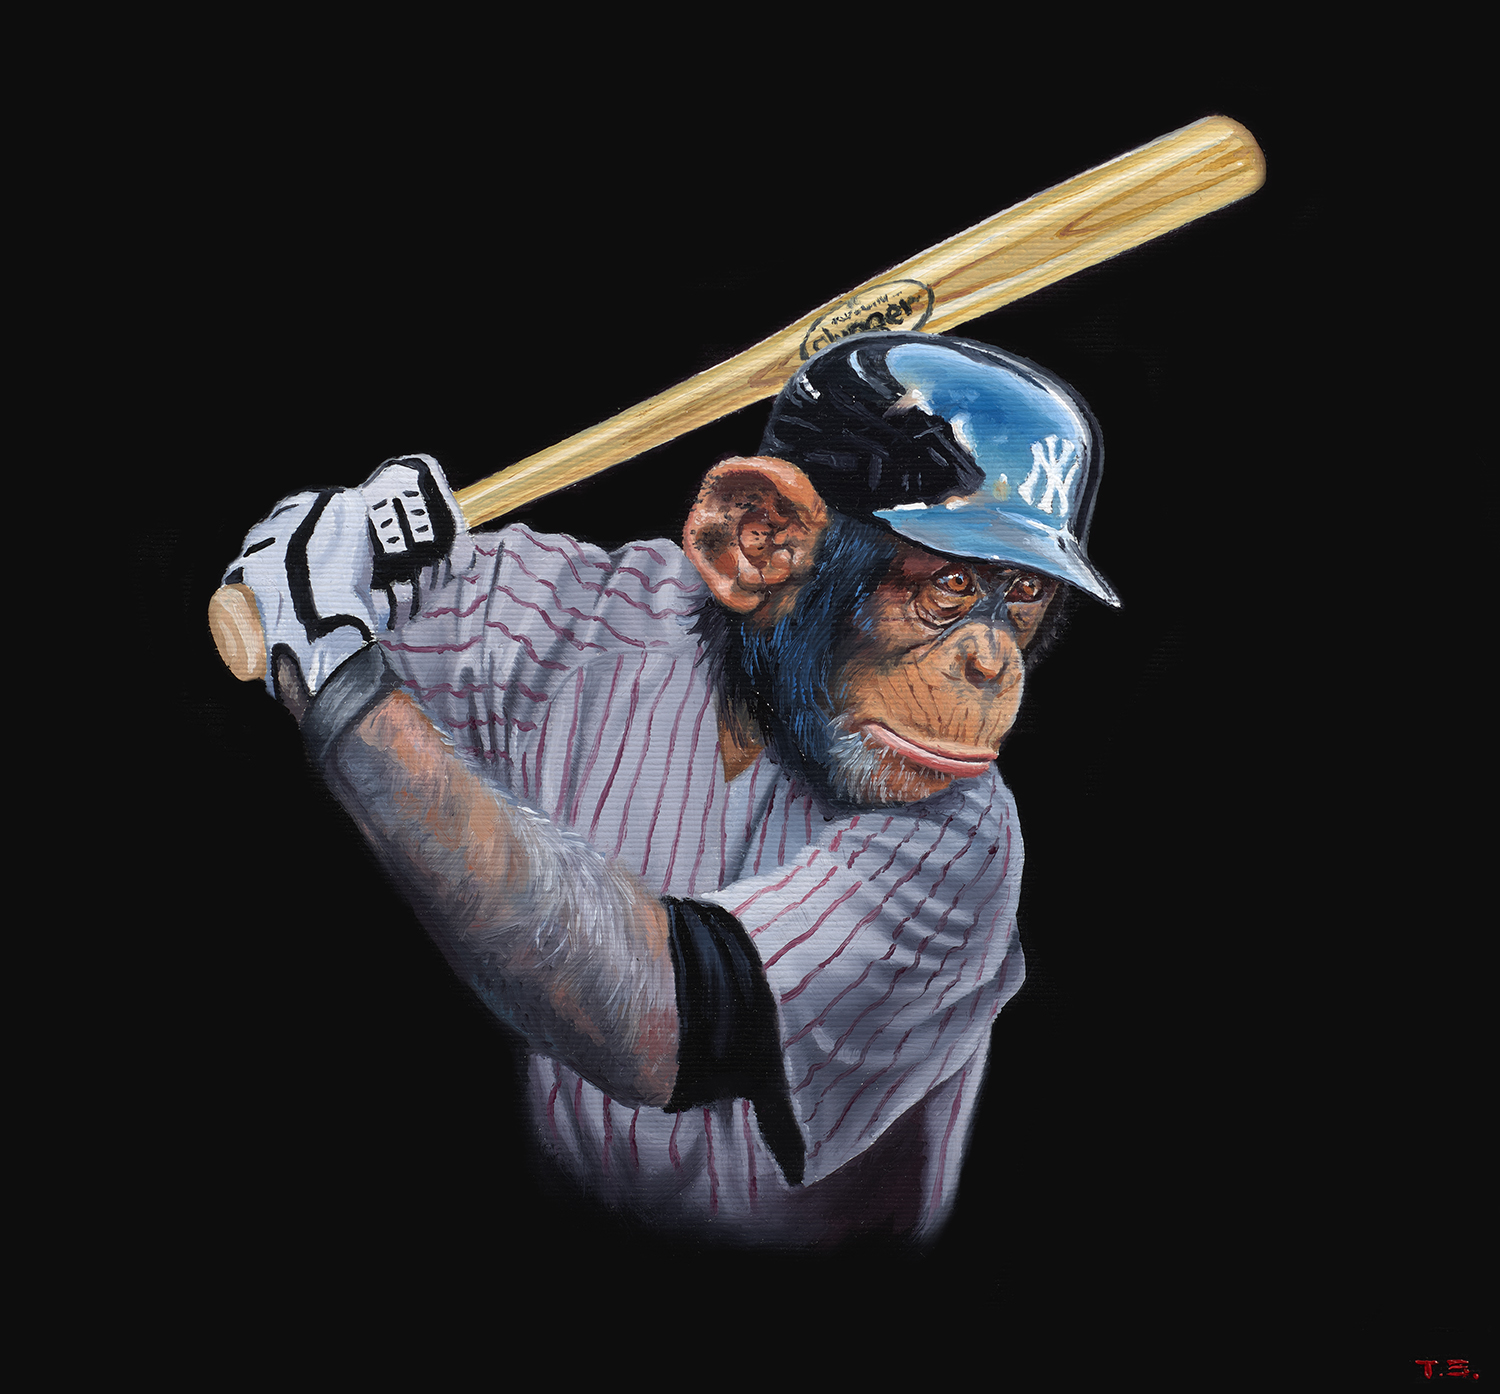 A monkey with a Yankees' uniform on getting ready to swing a bat - Tony South - Play Ball